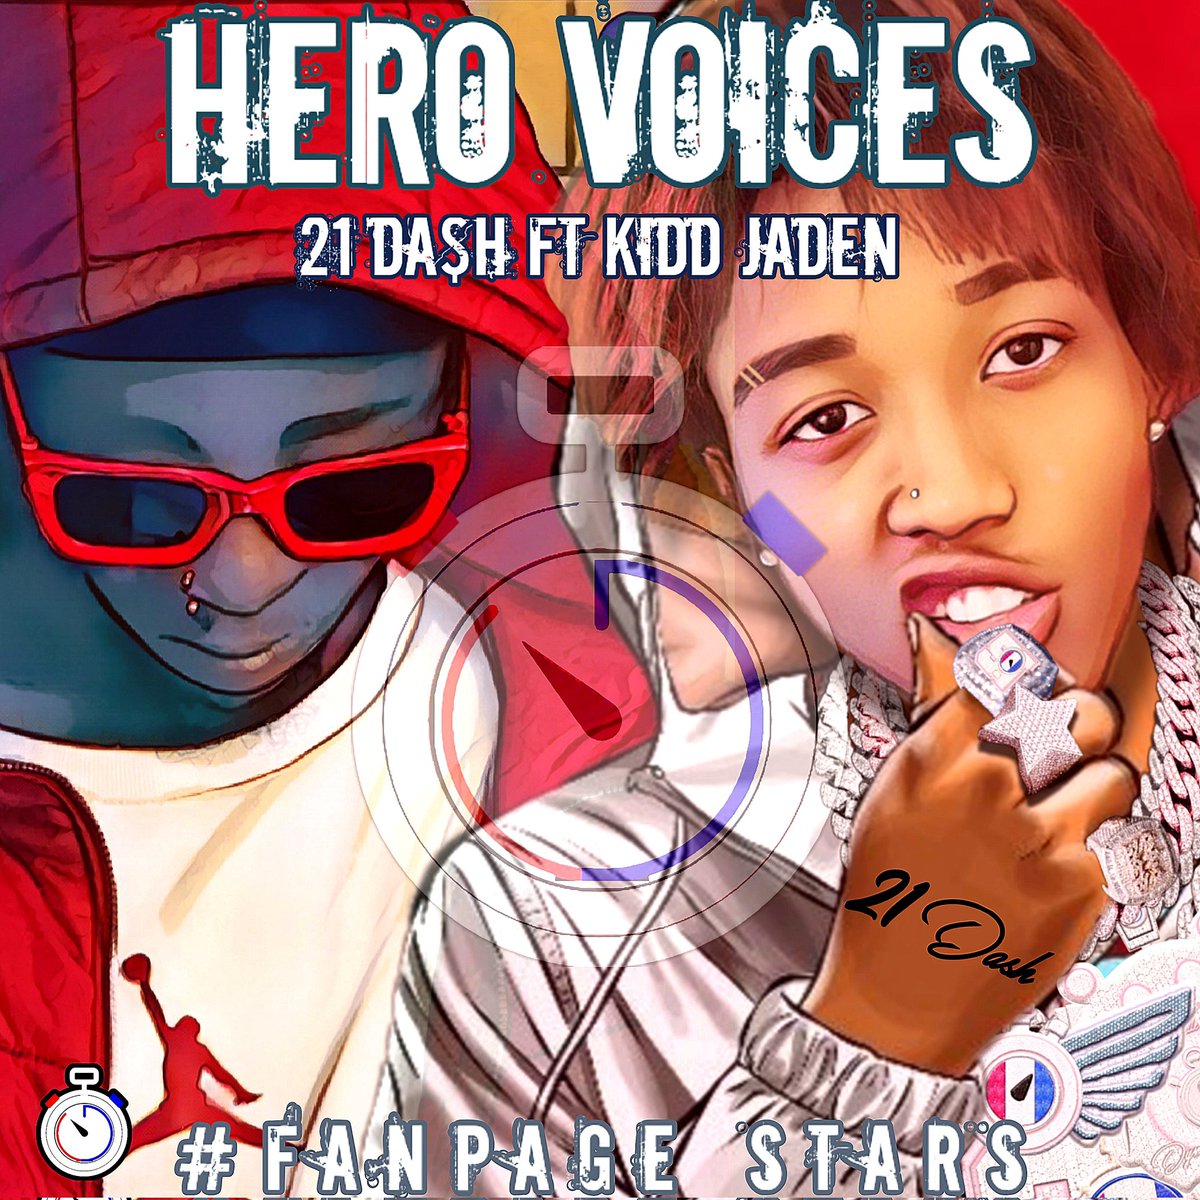 #HEROVOICES!!! ladies and Gentlemen fans and Followers Gere ta' tell you that #21DASH FT #KIDDJADEN droppin the song #MONDAY!!!❗️❗️🇺🇲💿🔥🎤 DON'T MISS OUT ON THE FULL VERSIONS @YouTube @SoundCloud @BandLab even @instagram contents @21_dash21 🎤🔥🇺🇲💿❗️